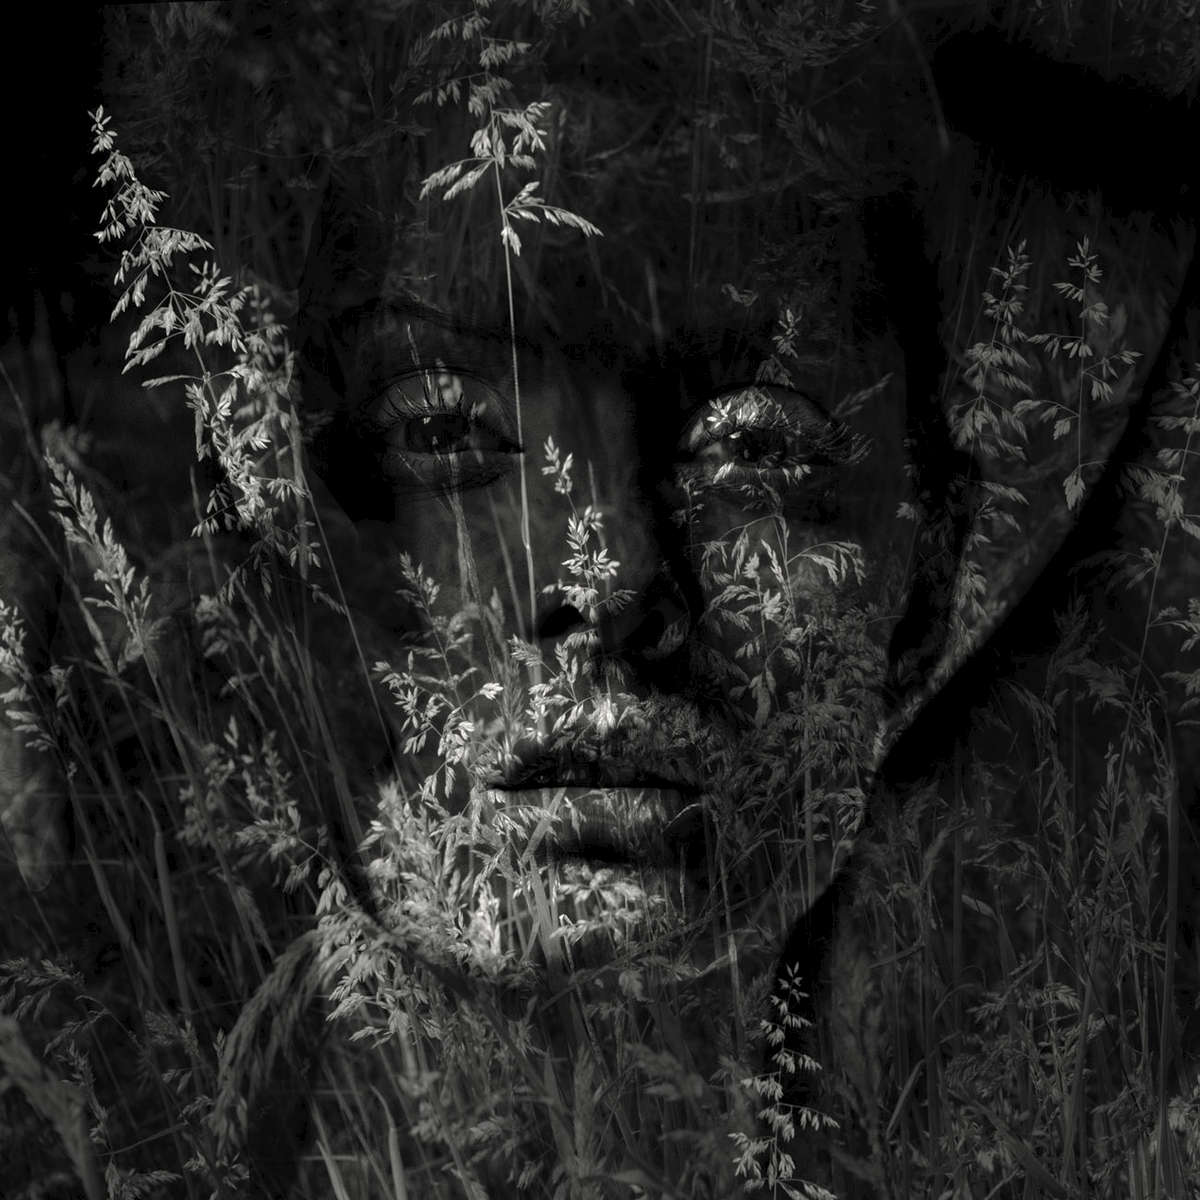 Double exposure nude portrait of a young woman with grasses